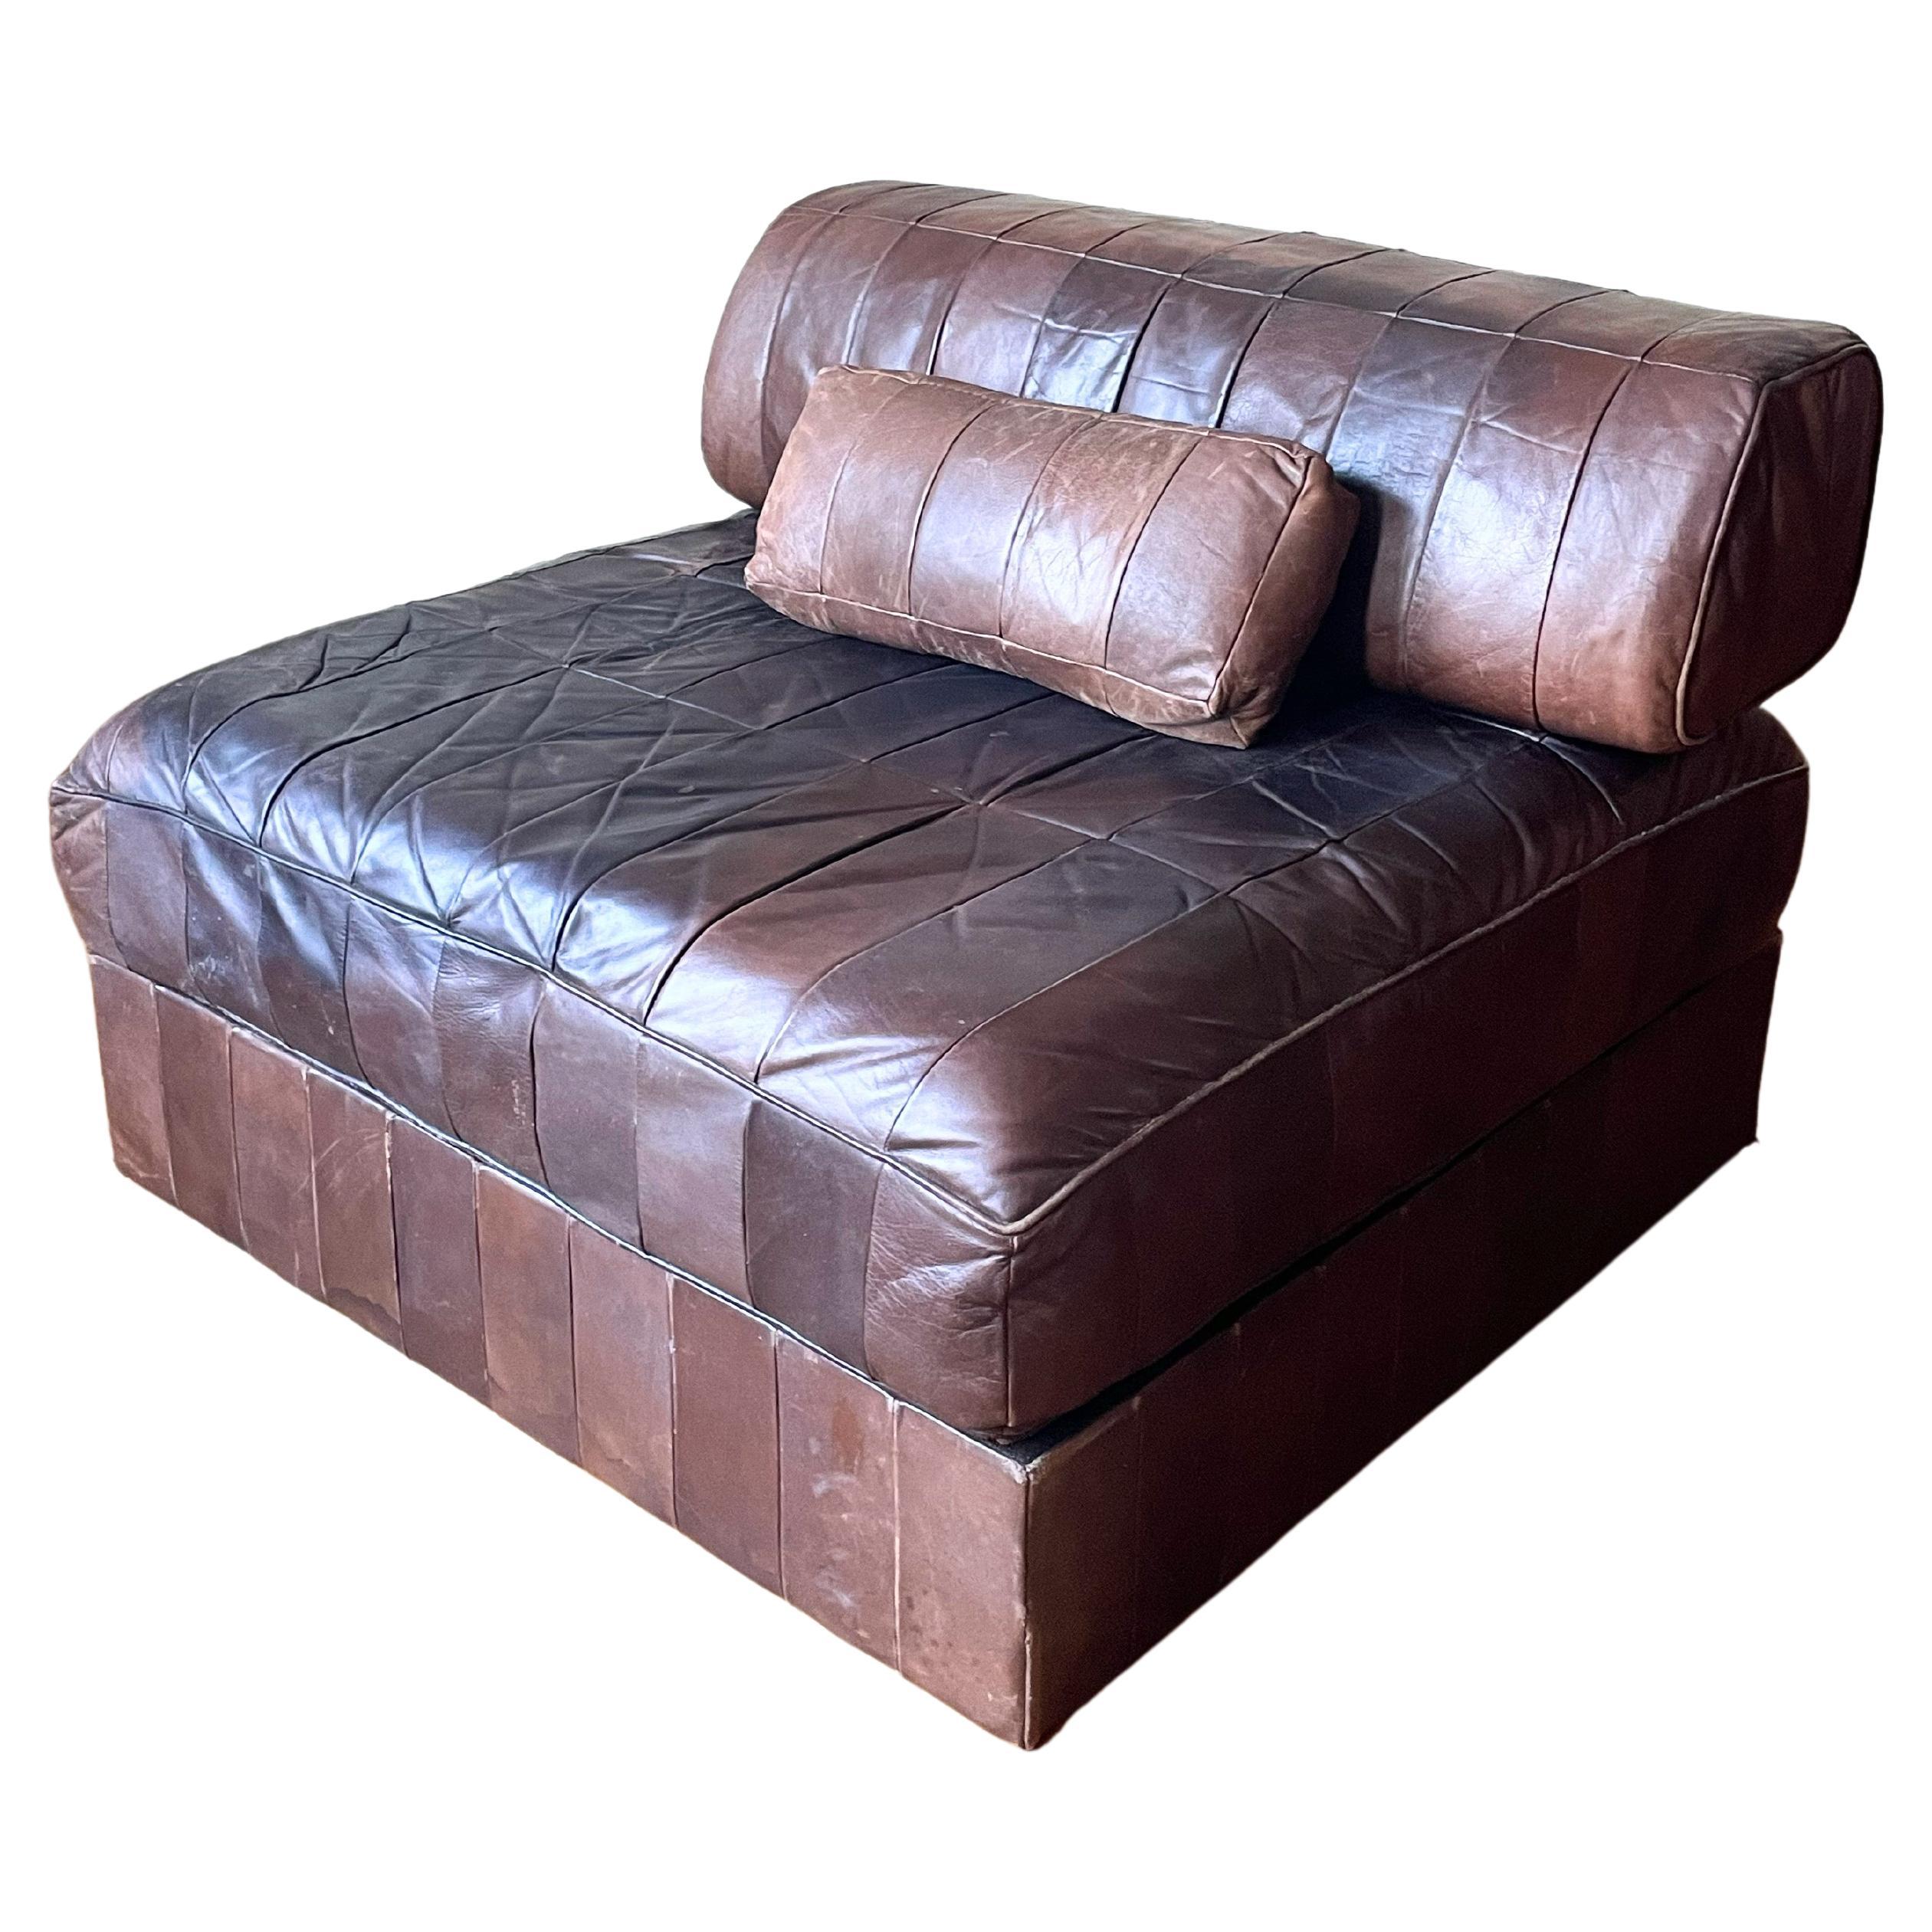 Vintage patchwork model DS 88 brown leather modular element. It was manufactured by De Sede in Switzerland in the 1970s. Four pieces are available. The pieces have a modular design and can be used together as a sofa, footrest or separate chair.